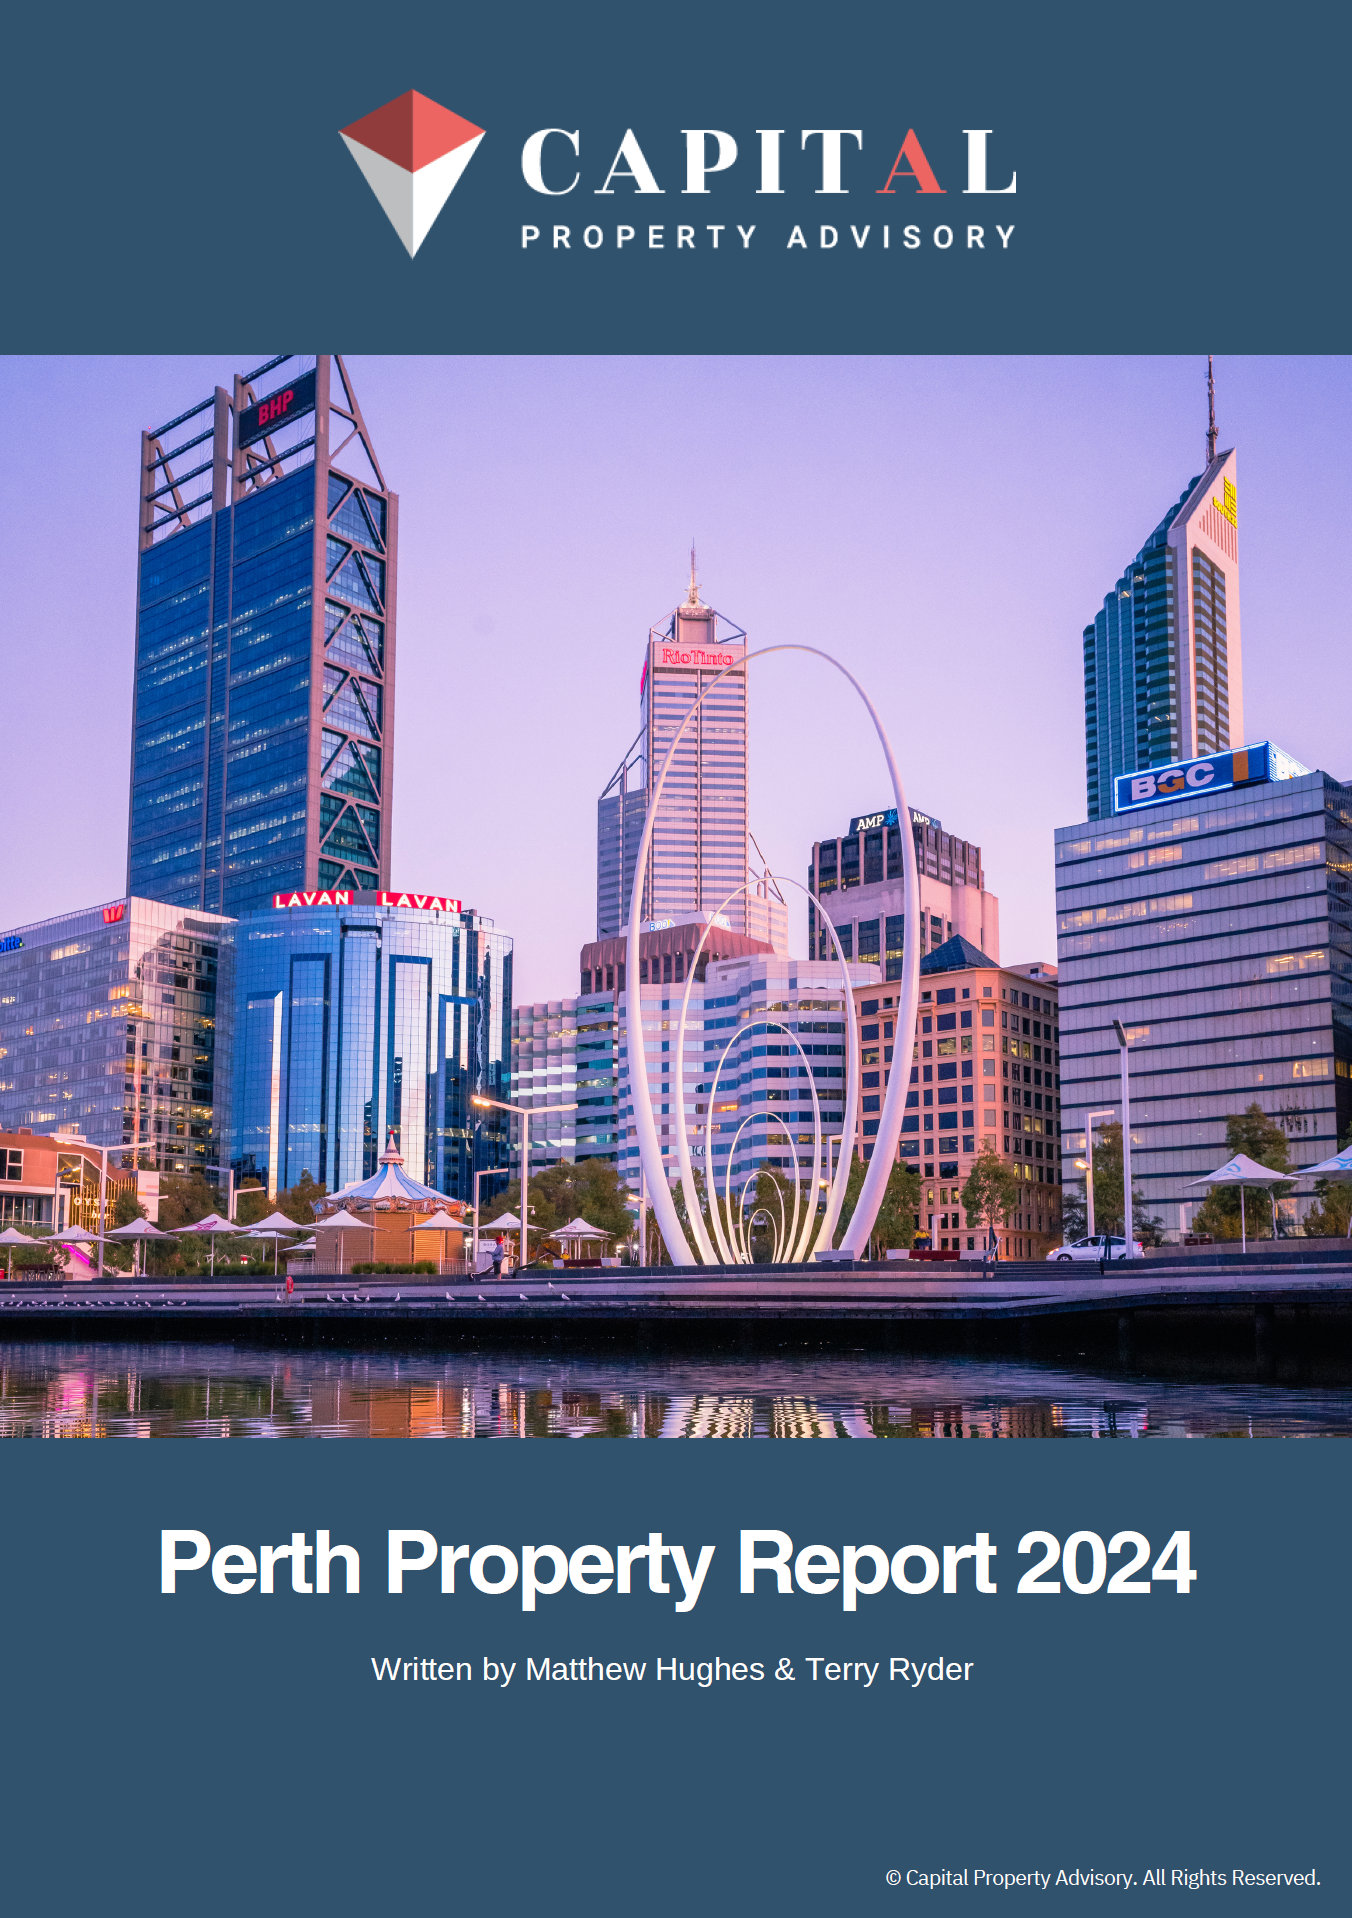 Download the CPA Perth Property Report